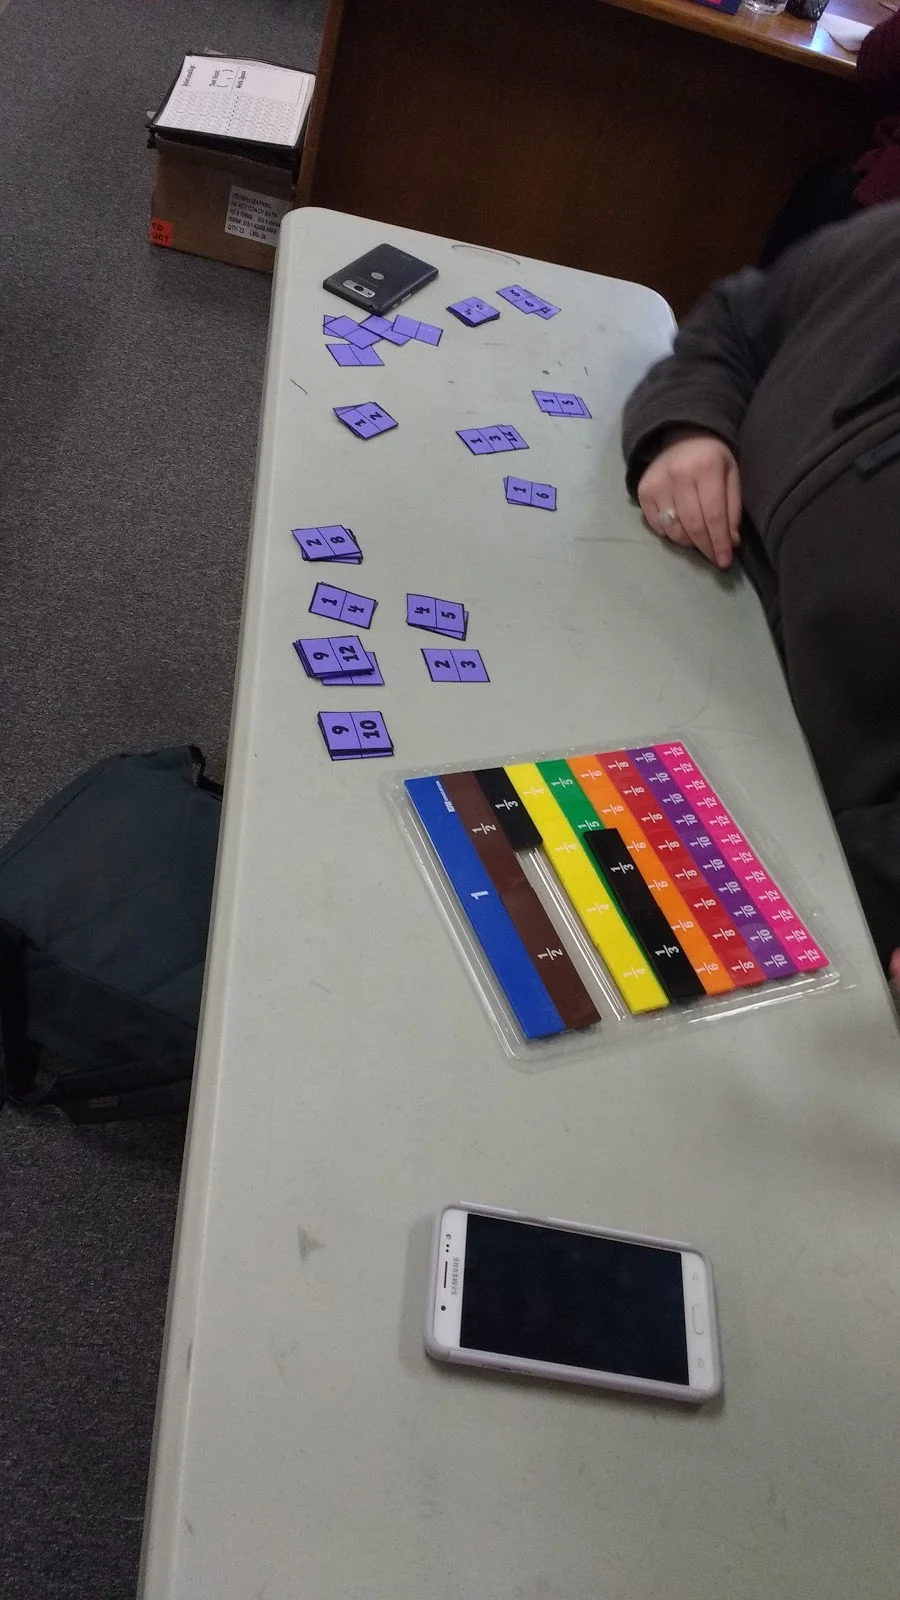 equivalent fractions card sort activity for math class